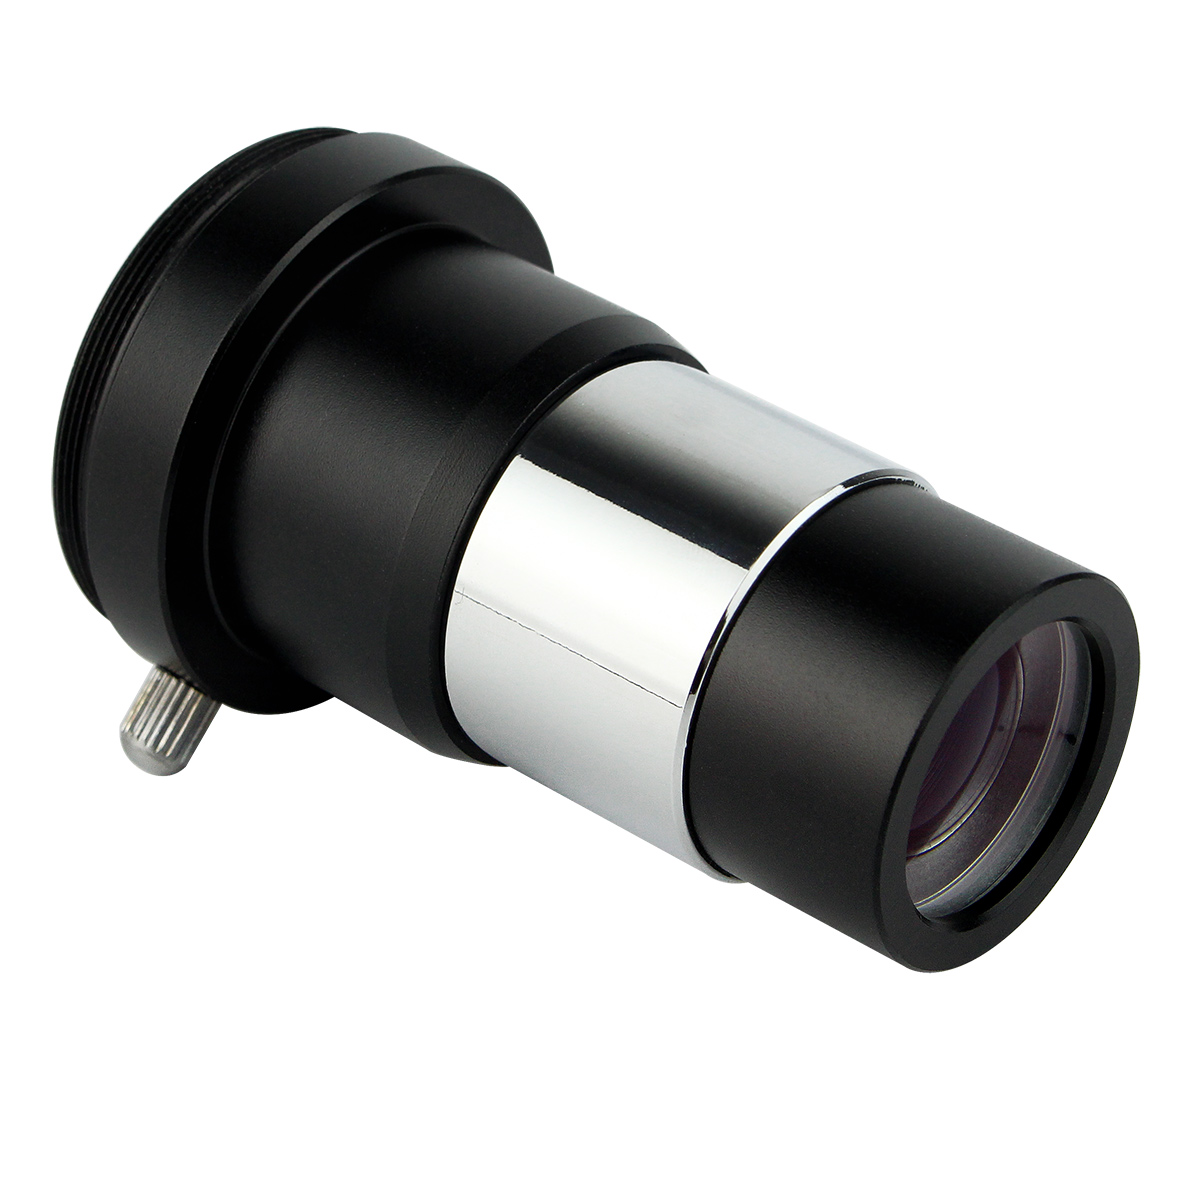 SVBONY 1.25" 2X Barlow Lens Multi-coated All Metal for Standard Telescope Eyepiece Astronomy / T Adapter Double Lens